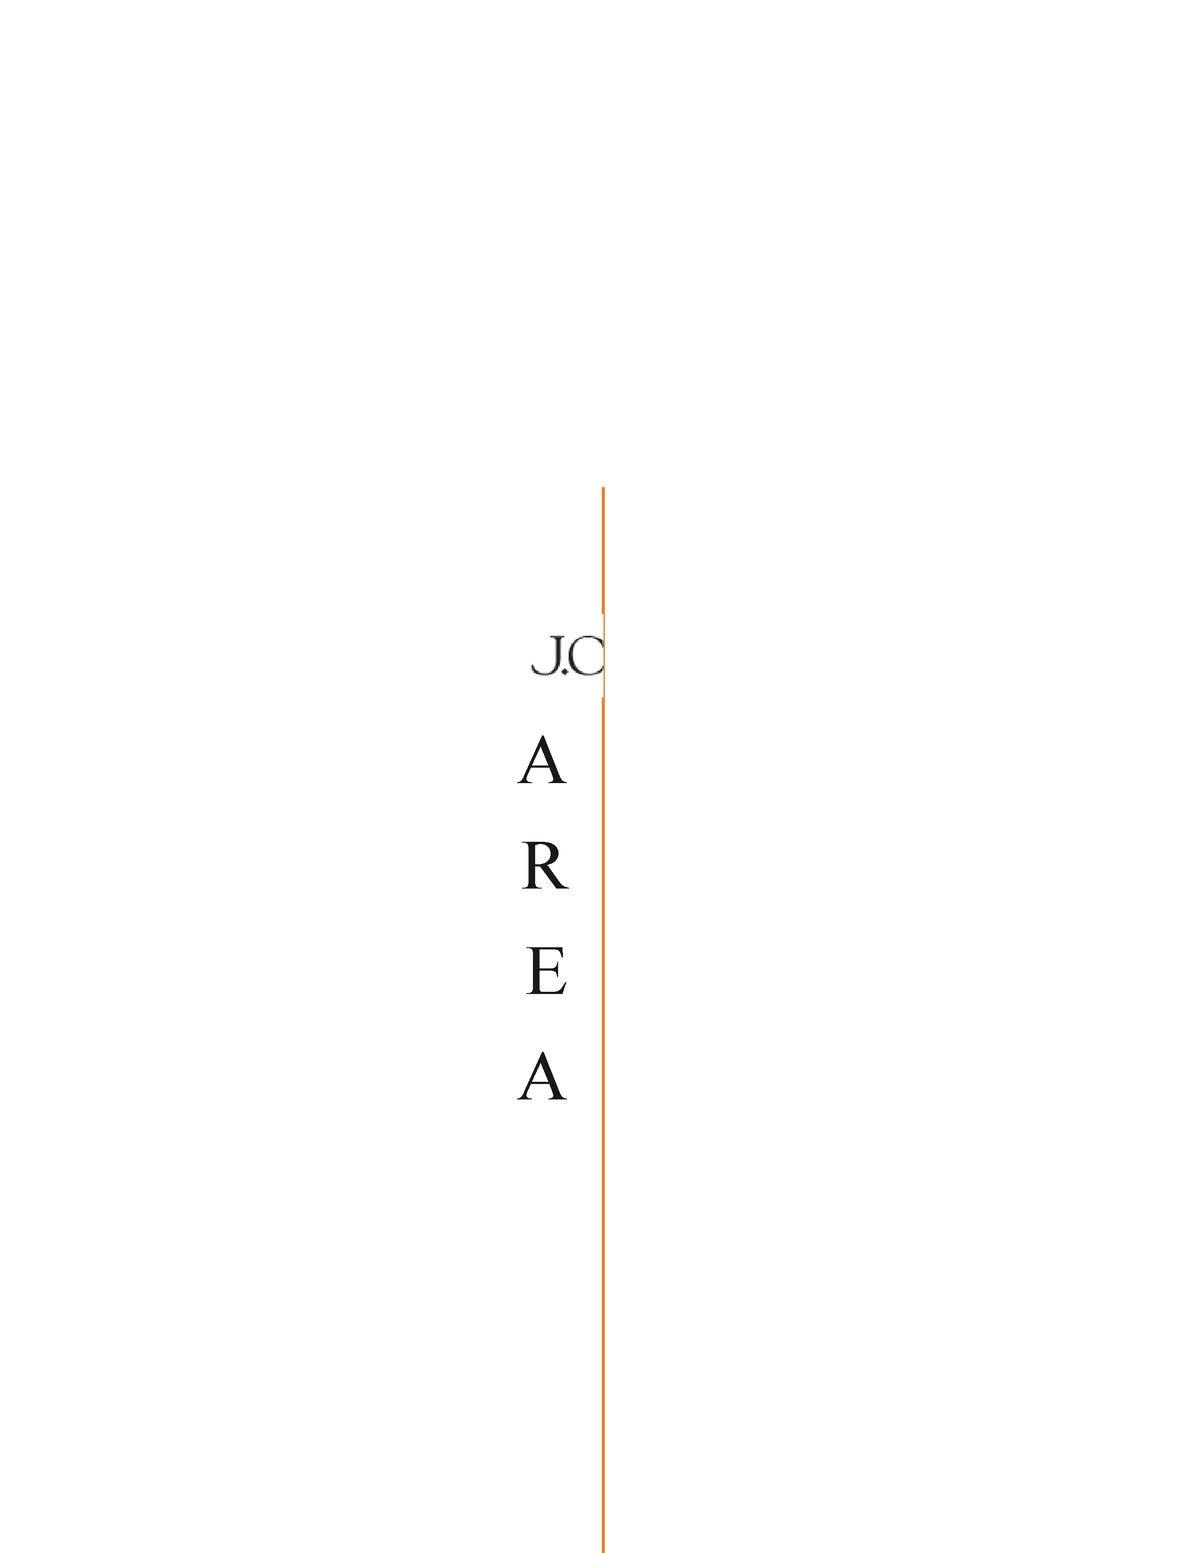 J.CREW: A LOGO DESIGN CASE STUDY. What is J.CREW?, by Ayussxh